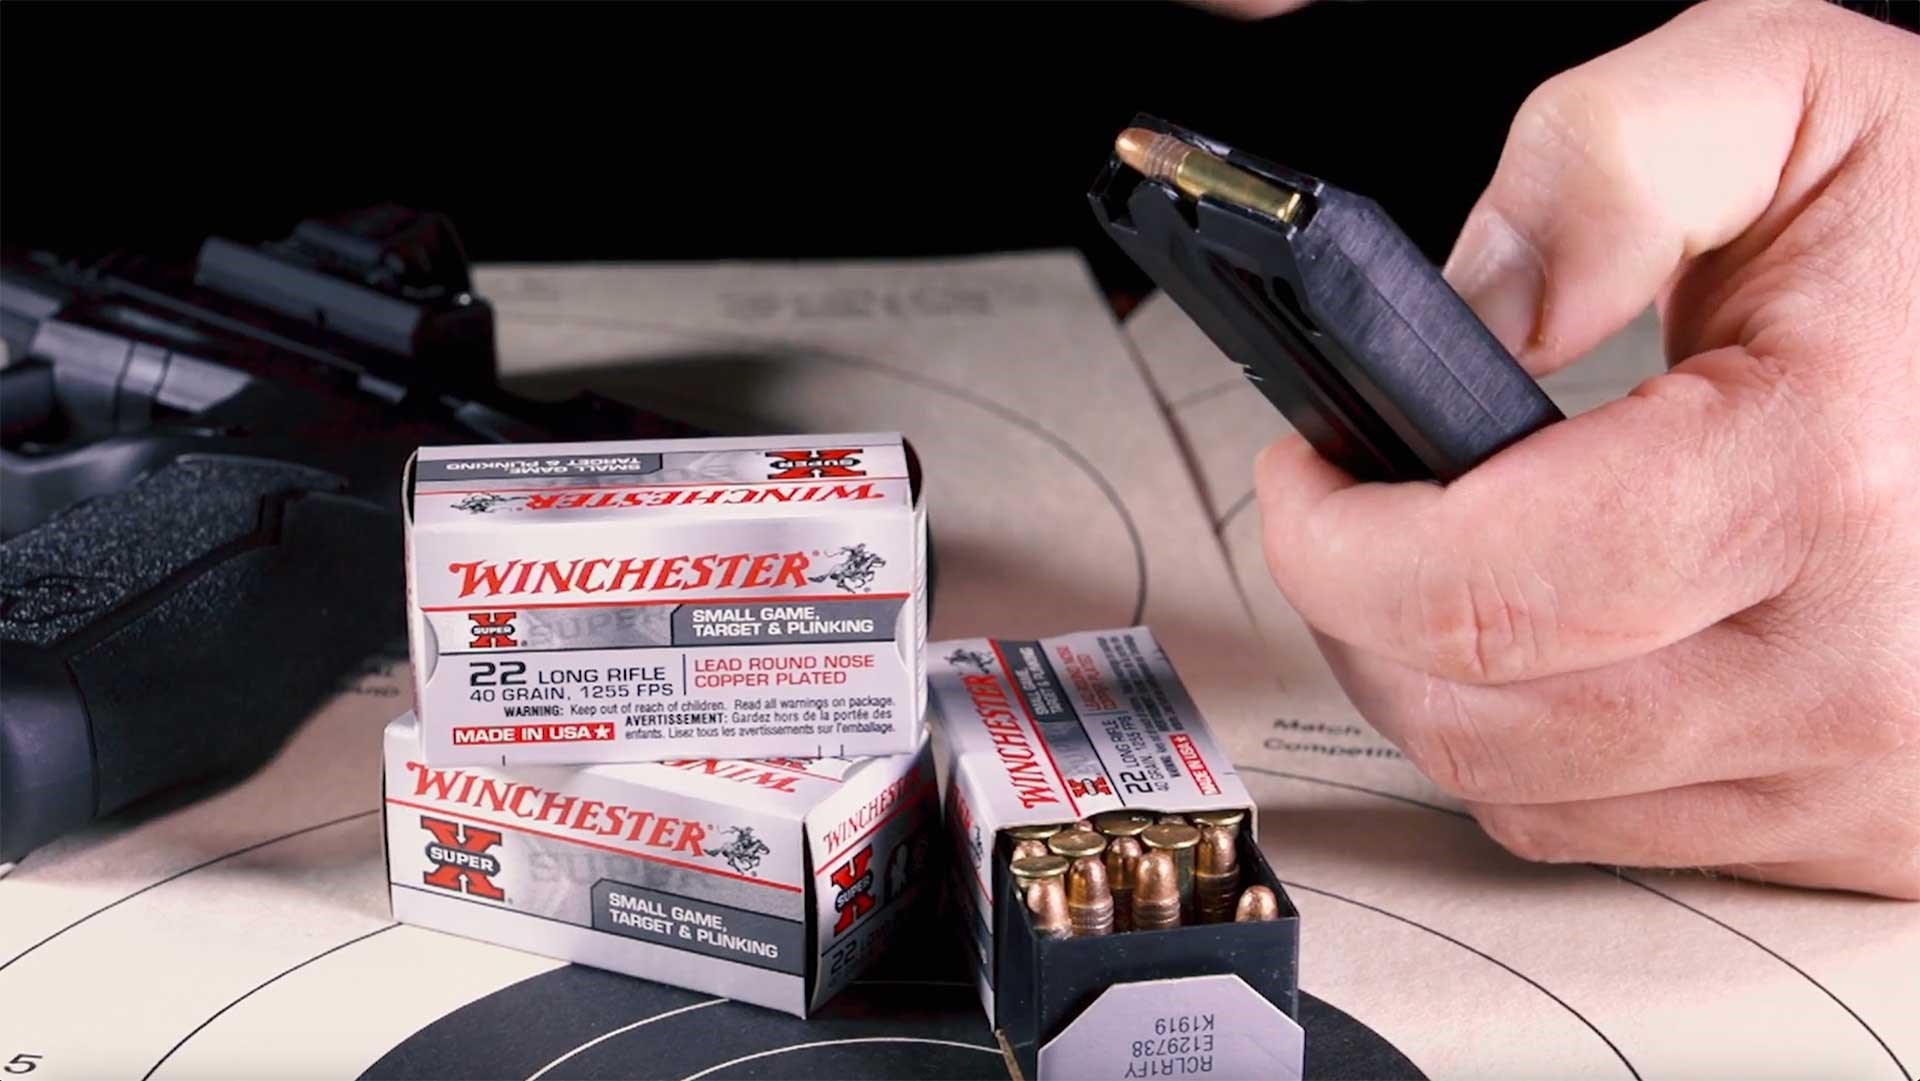 Taurus TX22 16-round magazine shown next to boxes of Winchester .22 Long Rifle cartridges.